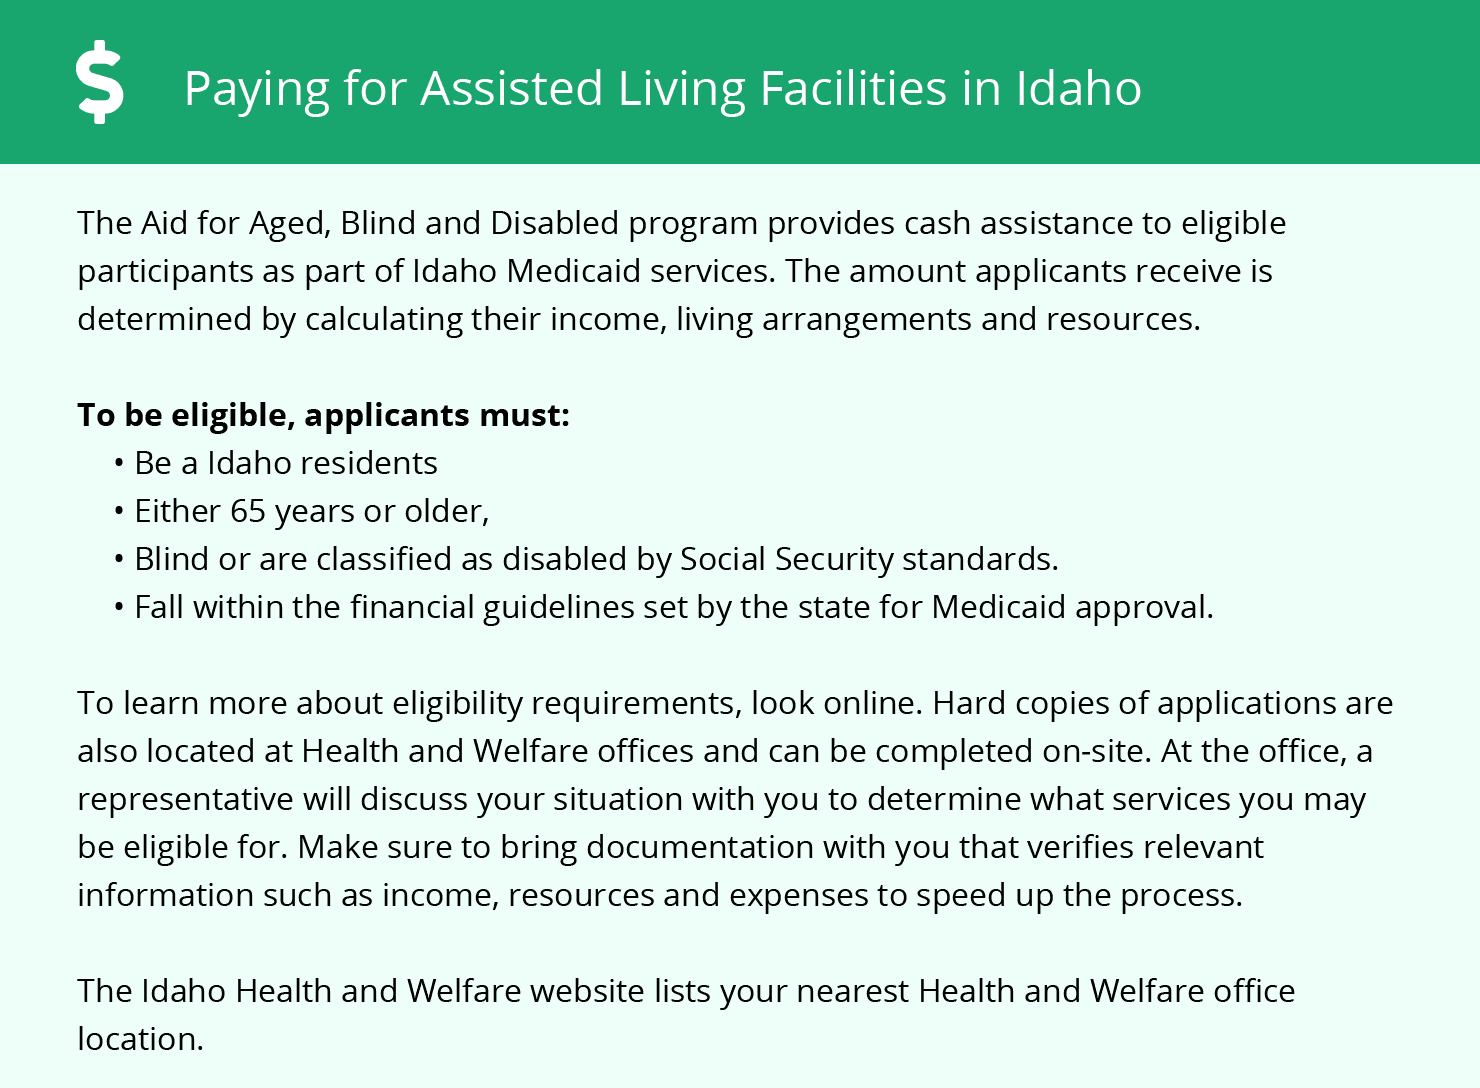 Financial Assistance for Assisted Living in Idaho